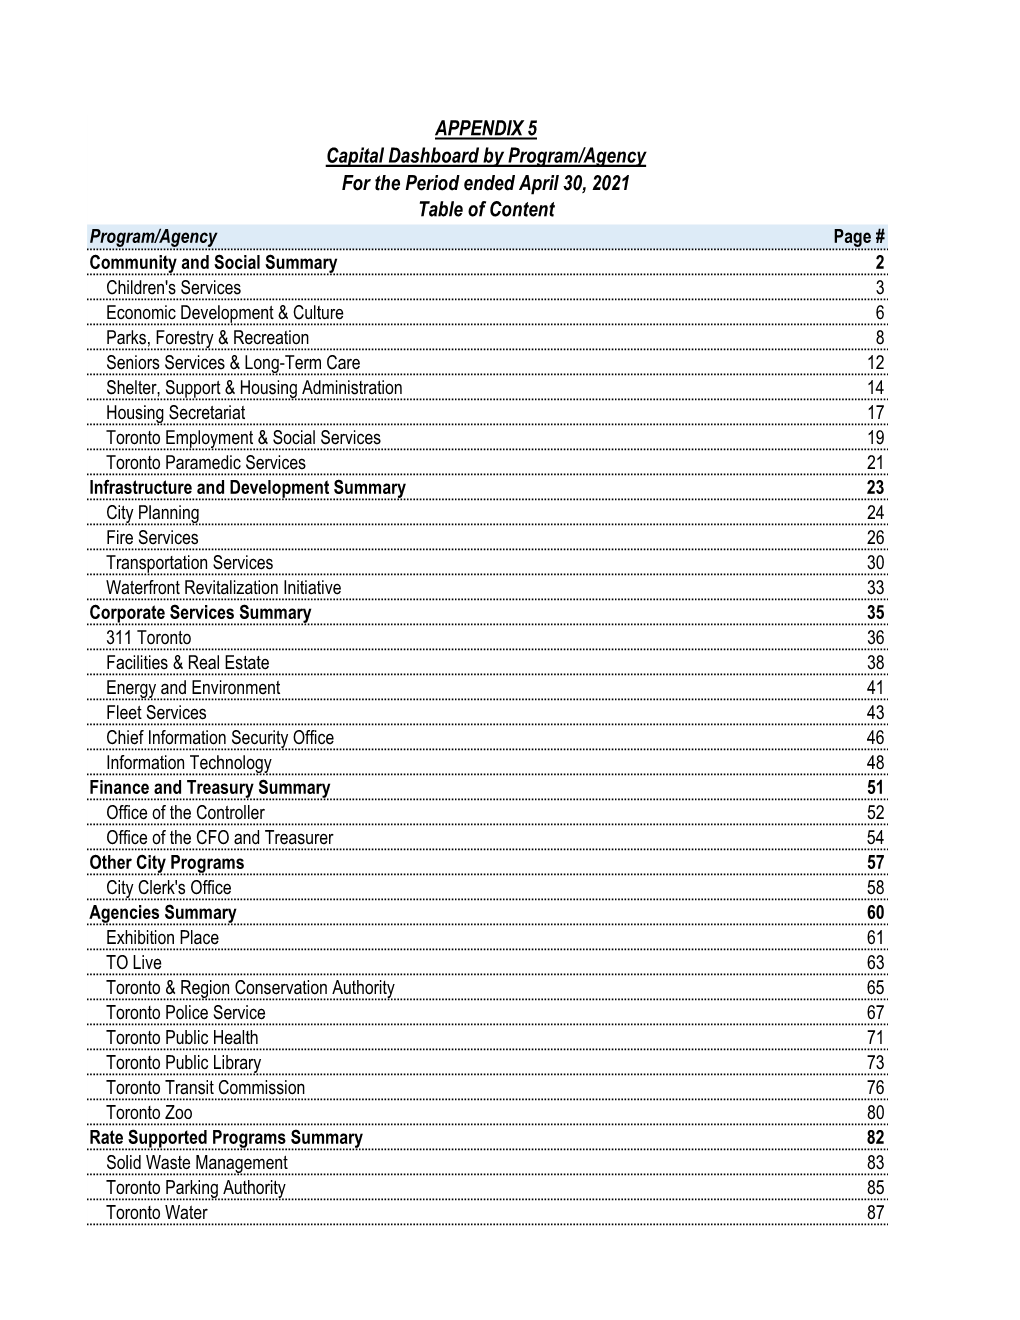 Appendix 5 2021 4M Capital Variance Dashboard by Program and Agency